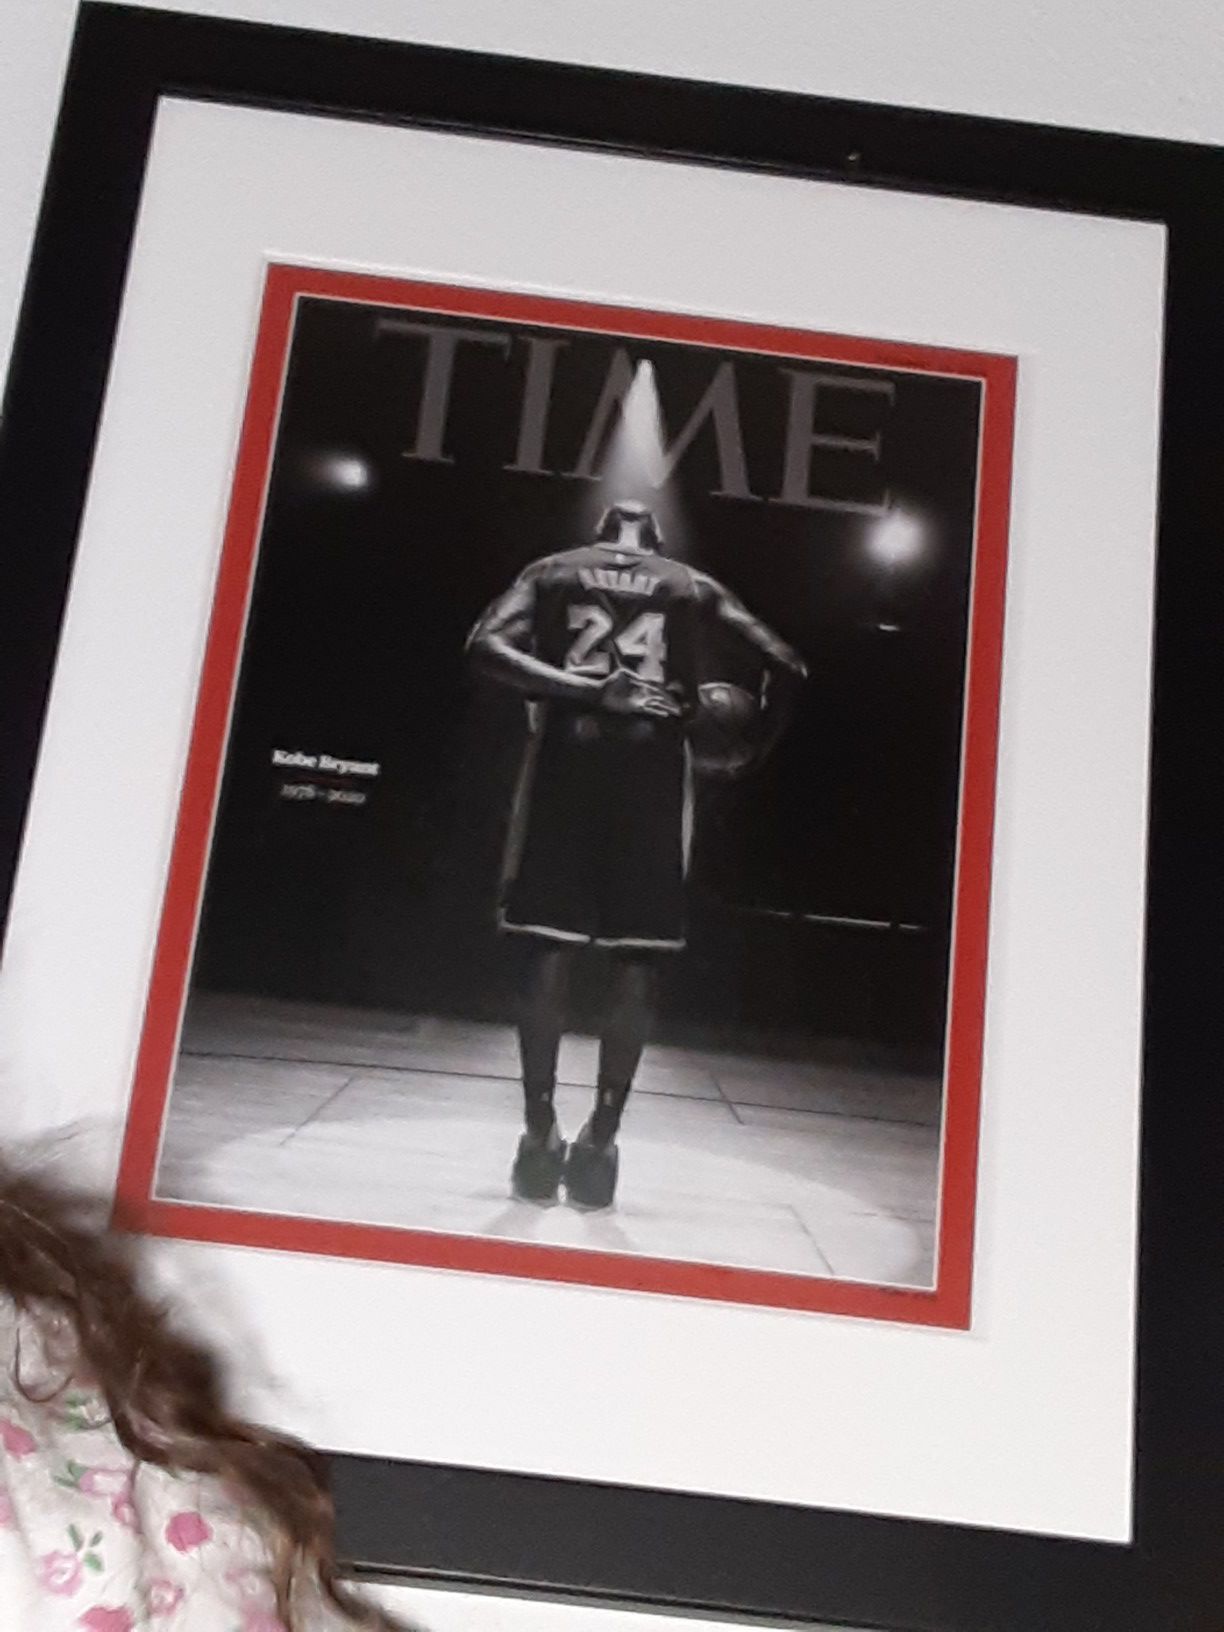 Kobe bryant time magazine picture wall frame